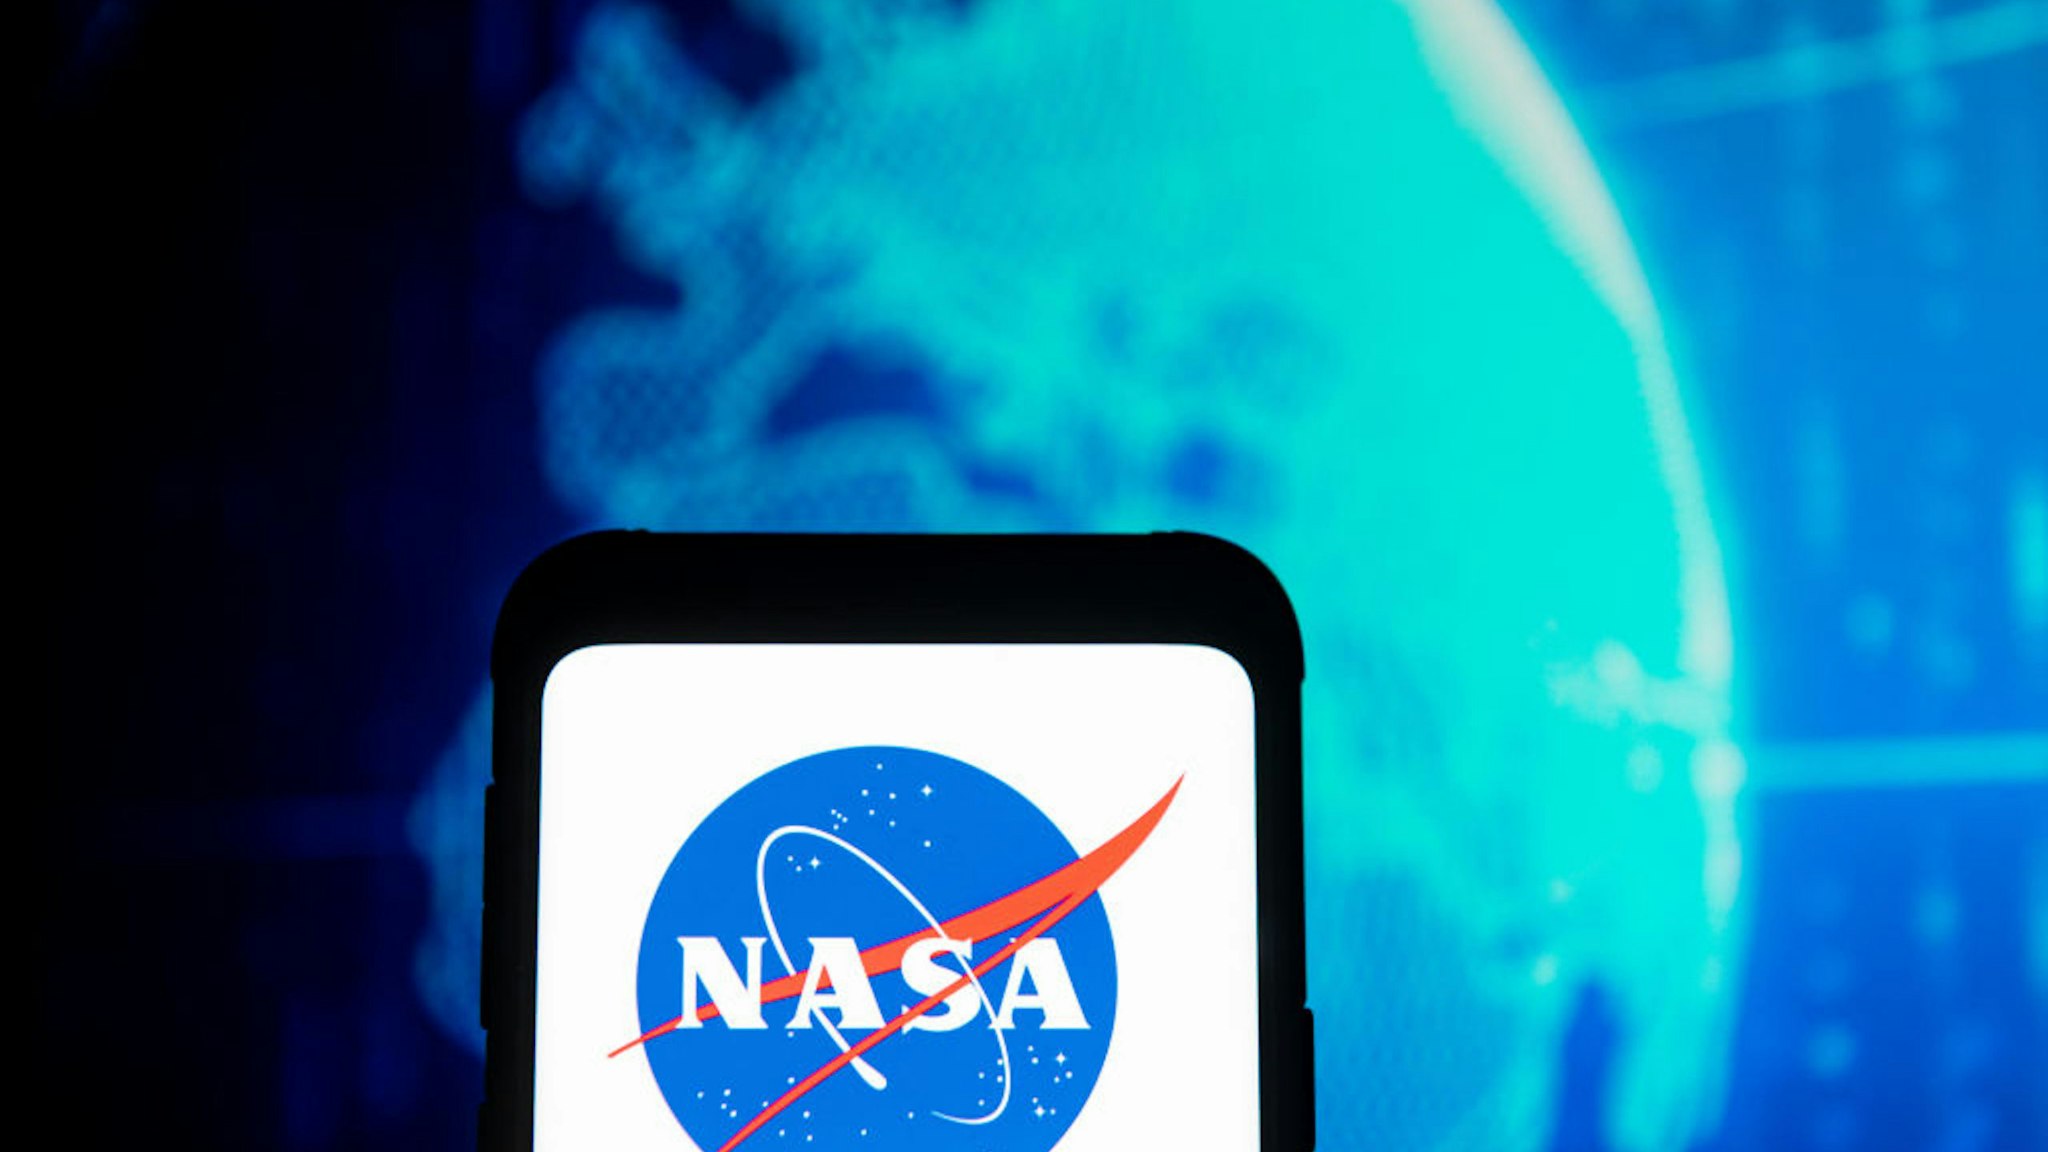 POLAND - 2020/03/23: In this photo illustration a NASA logo seen displayed on a smartphone.